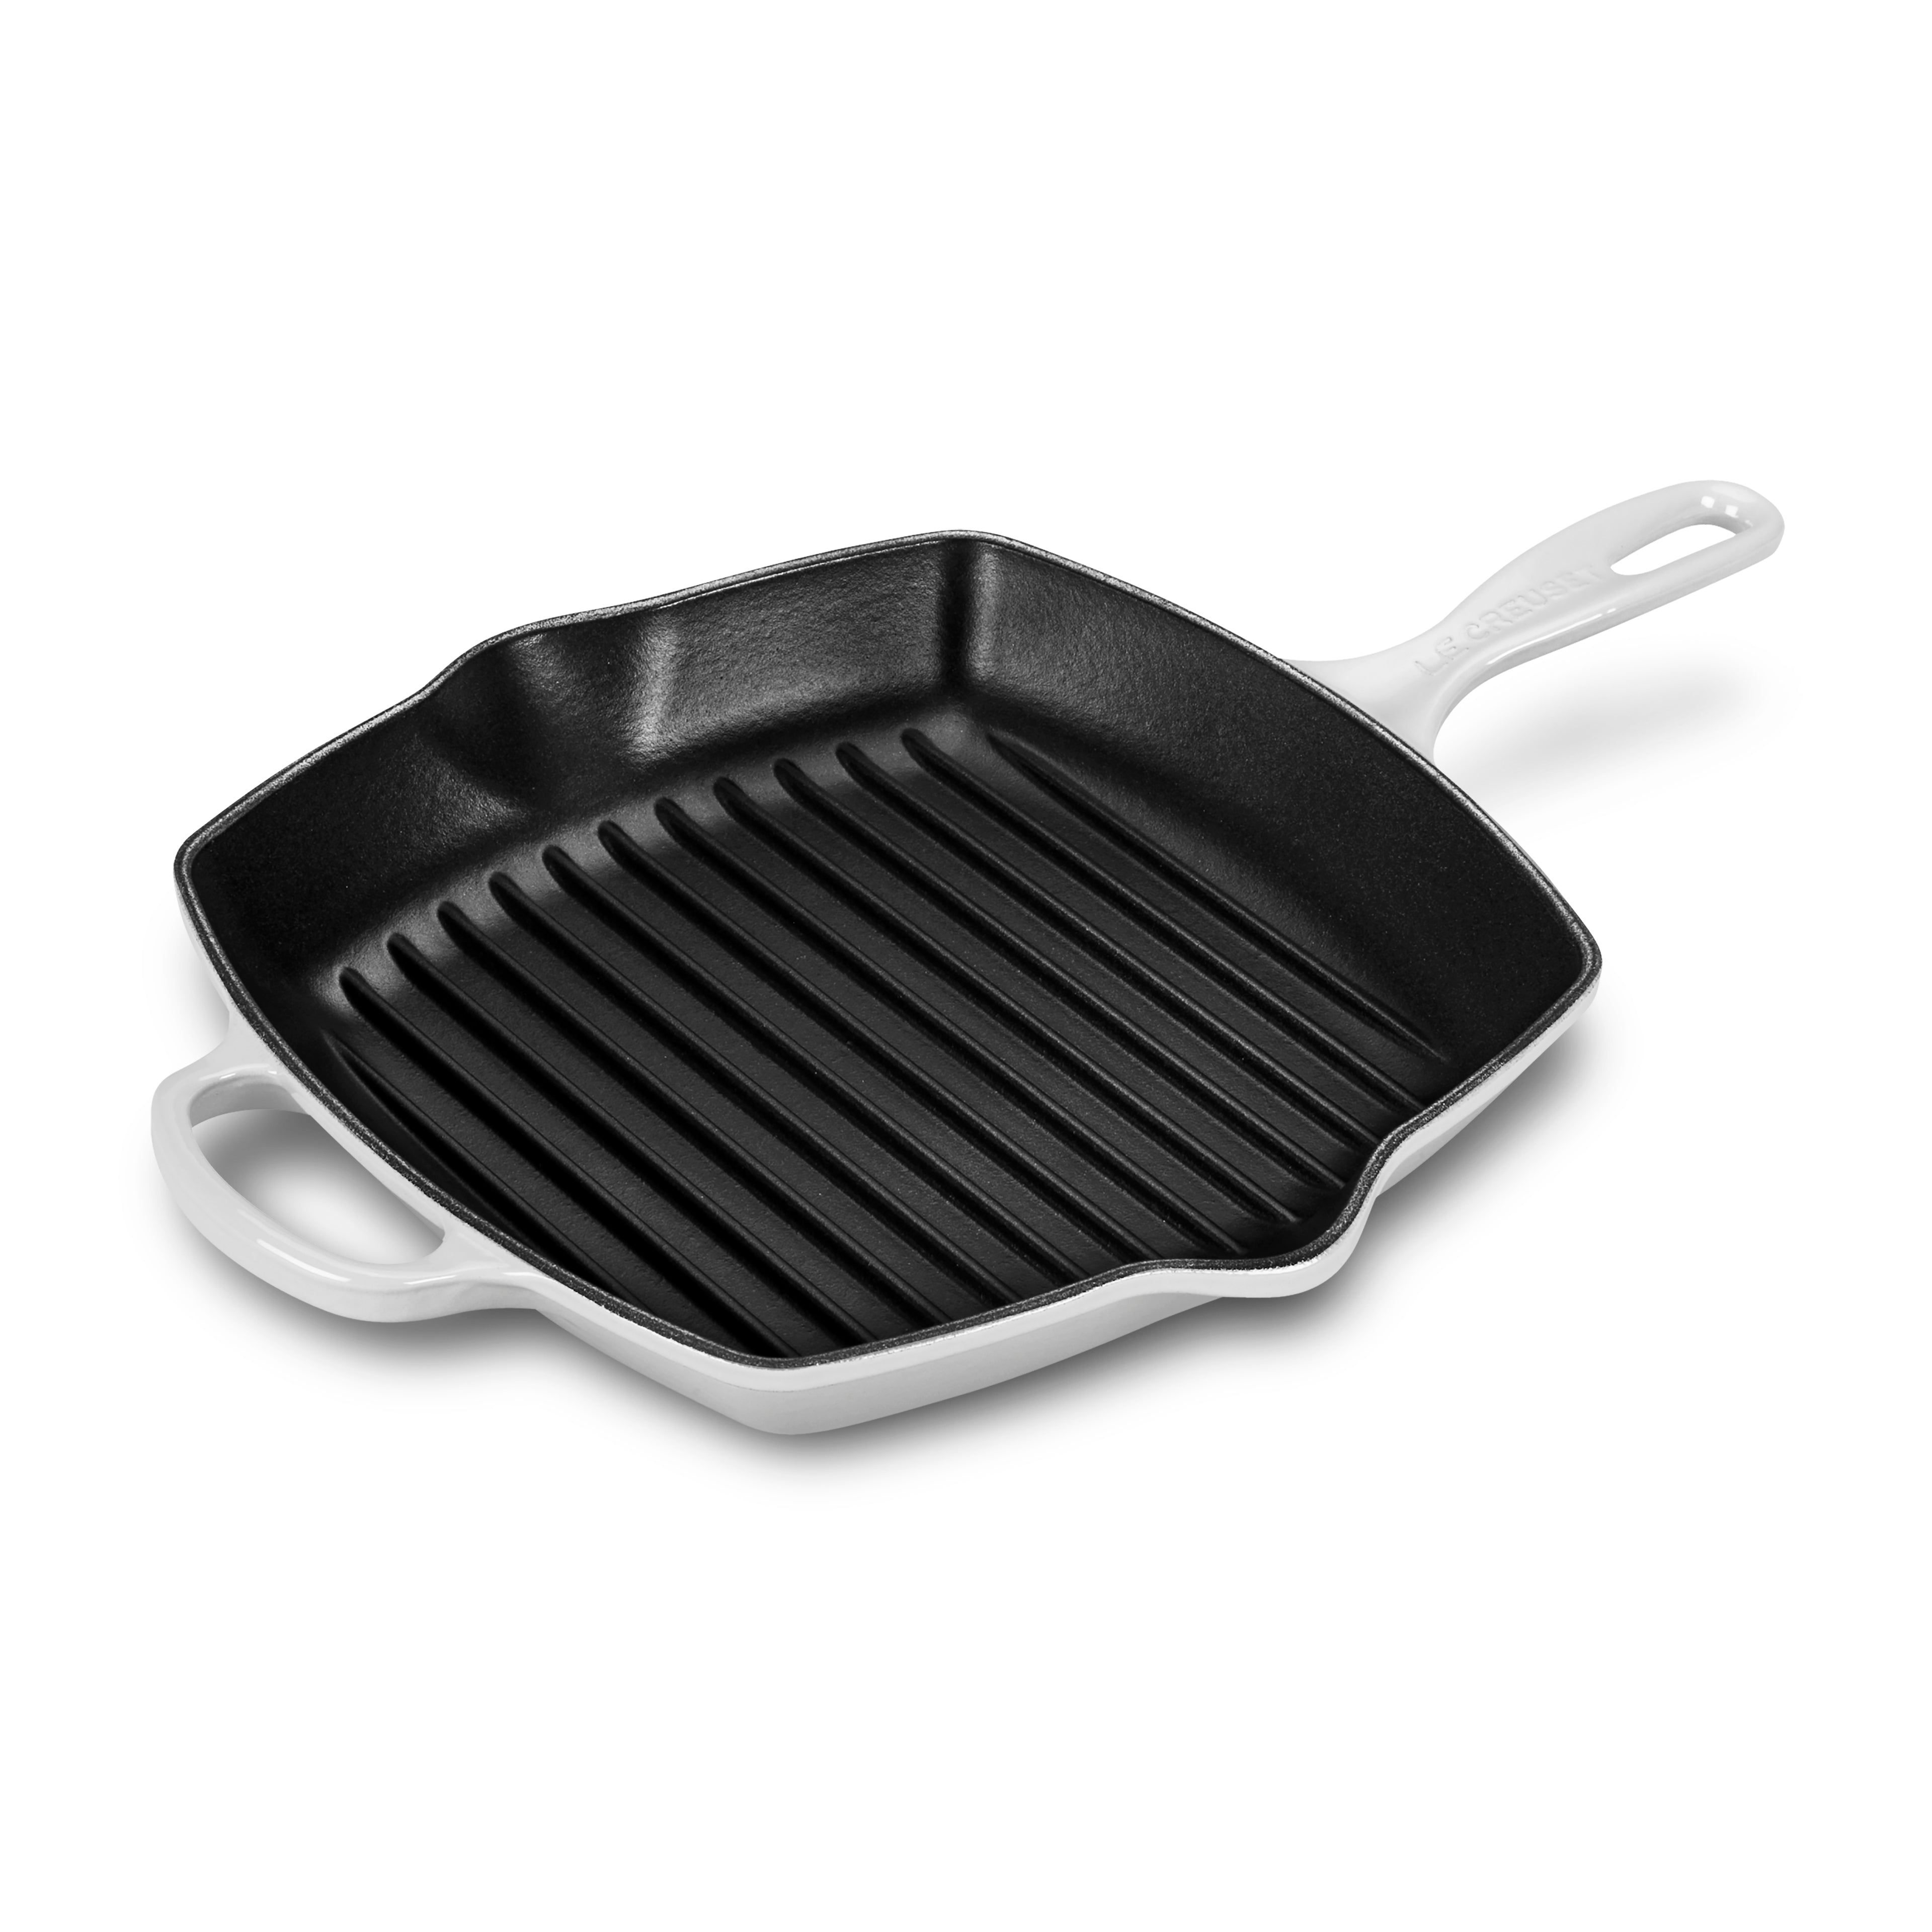 Le Creuset Signature Square 10.25 White Enameled Cast Iron Grill Pan  Skillet Grill + Reviews